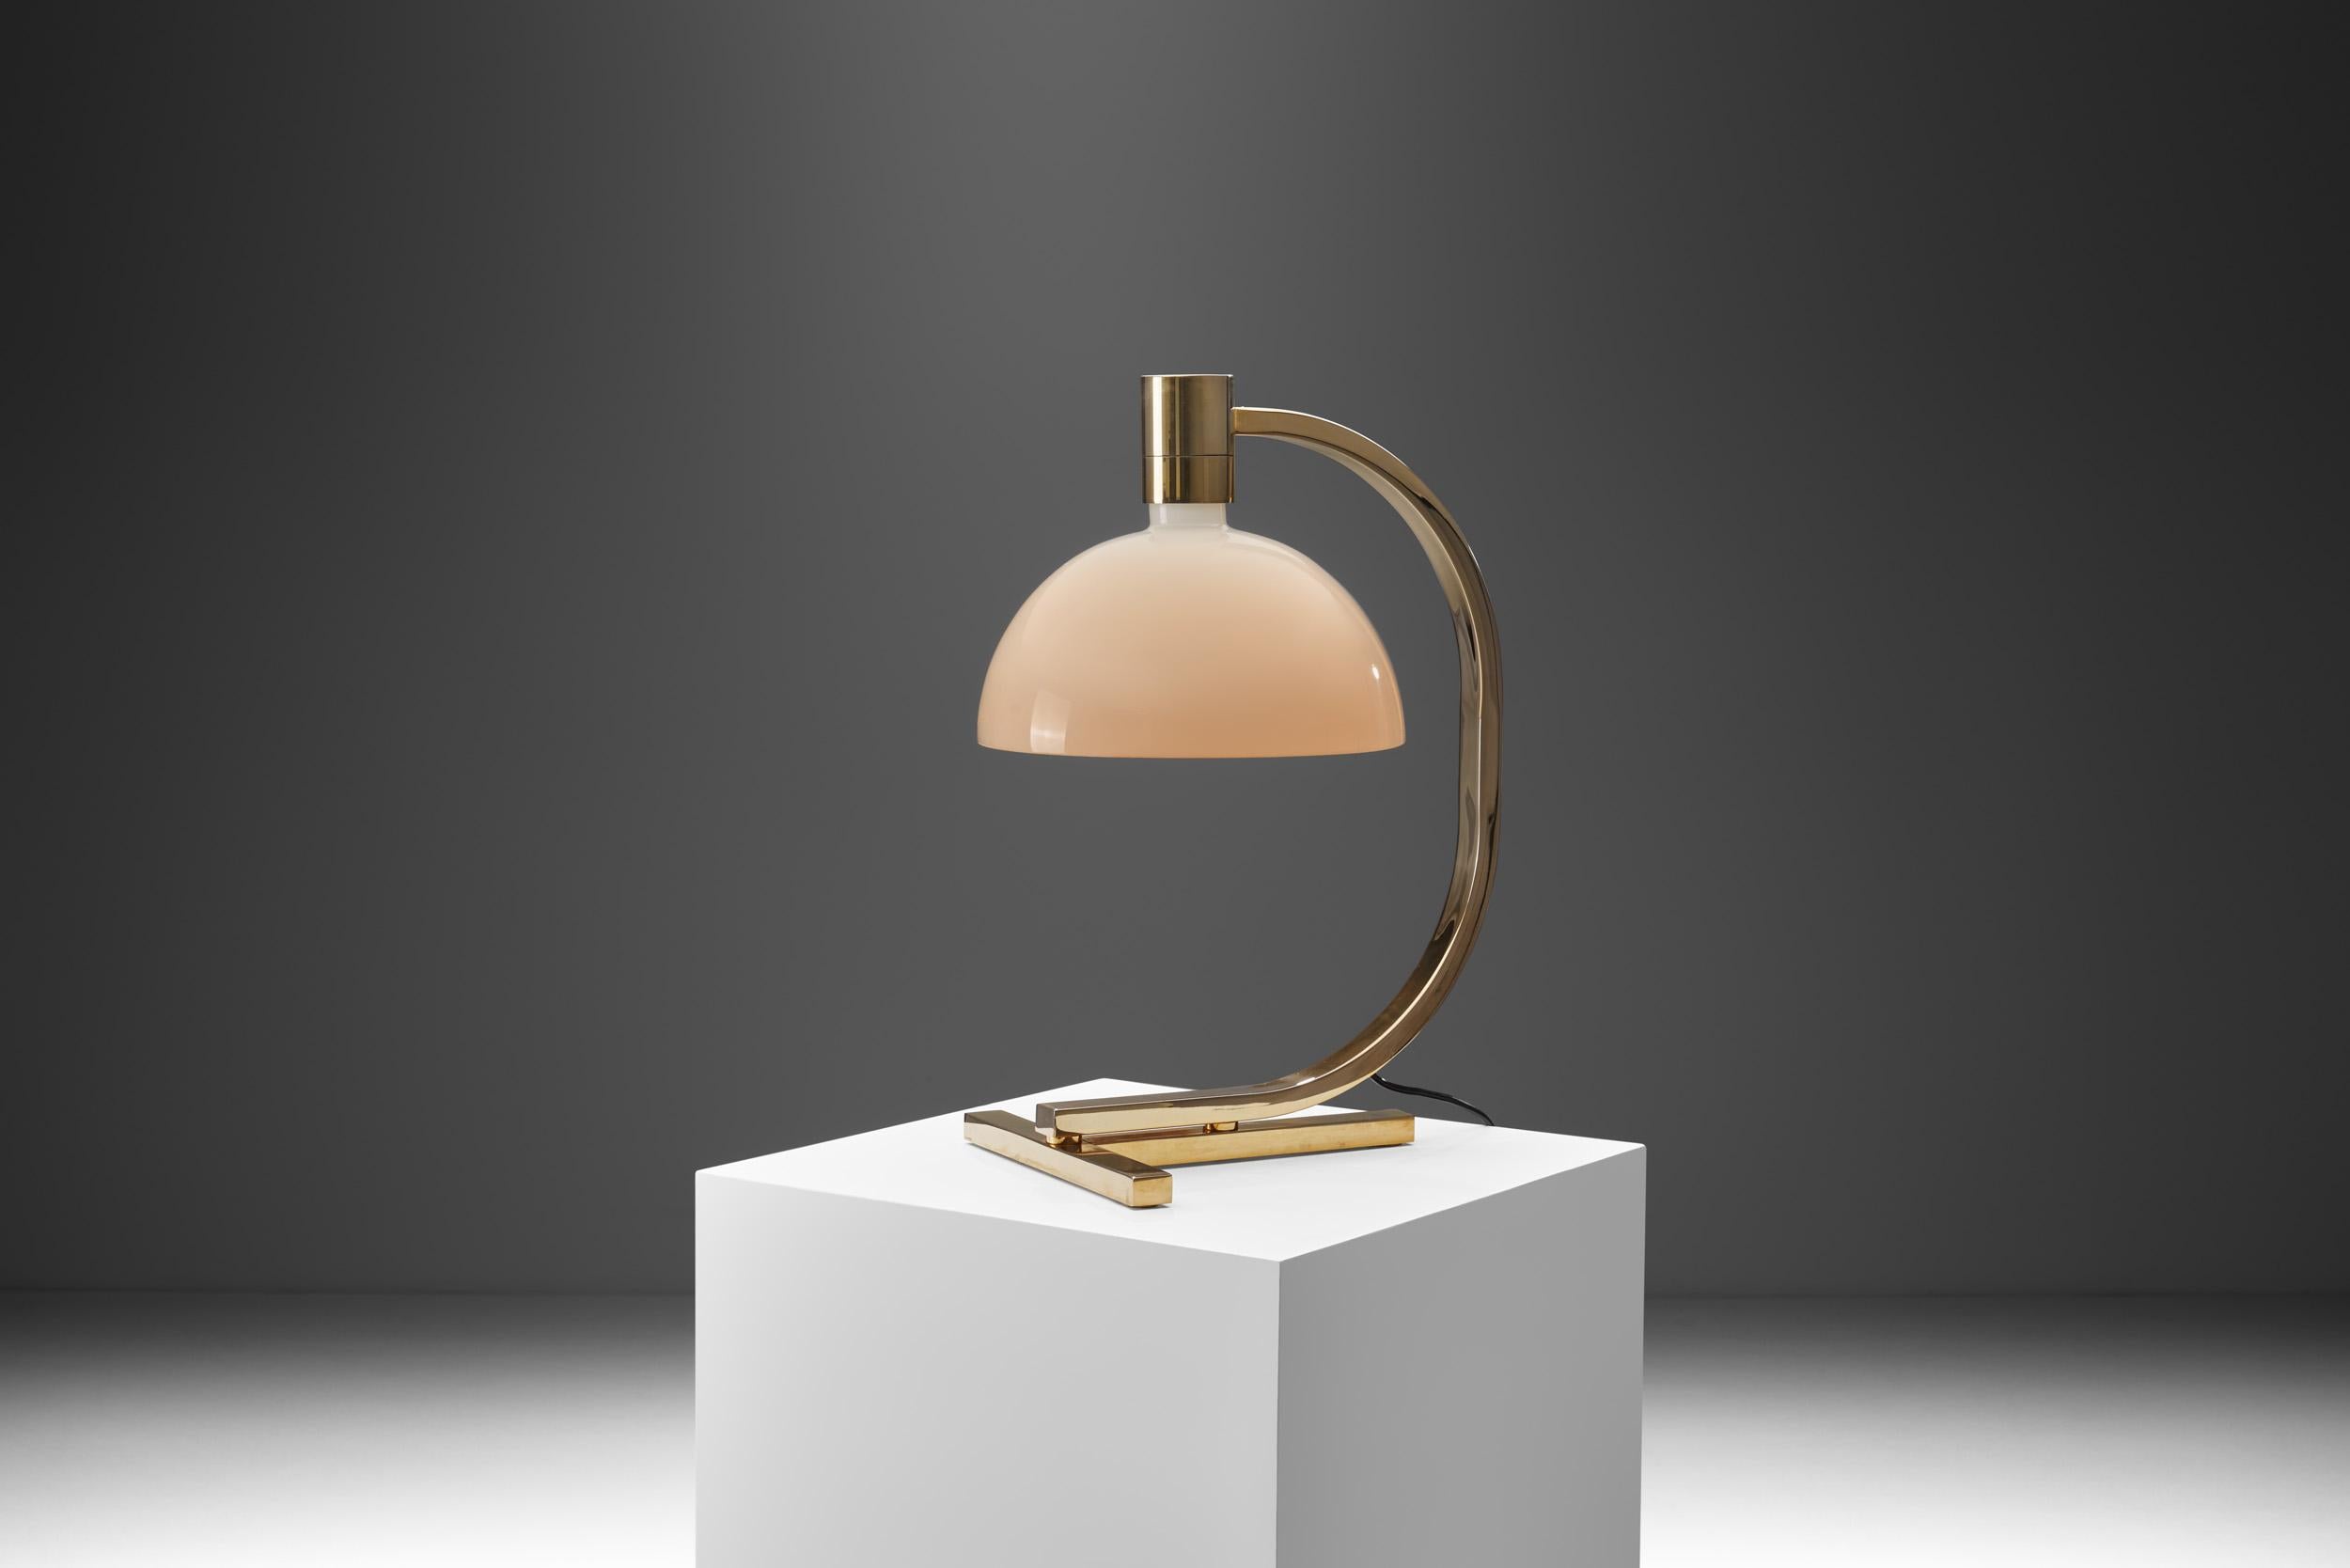 Minimal in form from concept to design, this historical lamp emerged from a traditional Italian craftsmanship practice. Using modern, artisanal materials for the design the designers applied a modern aesthetic to the design and construction of this